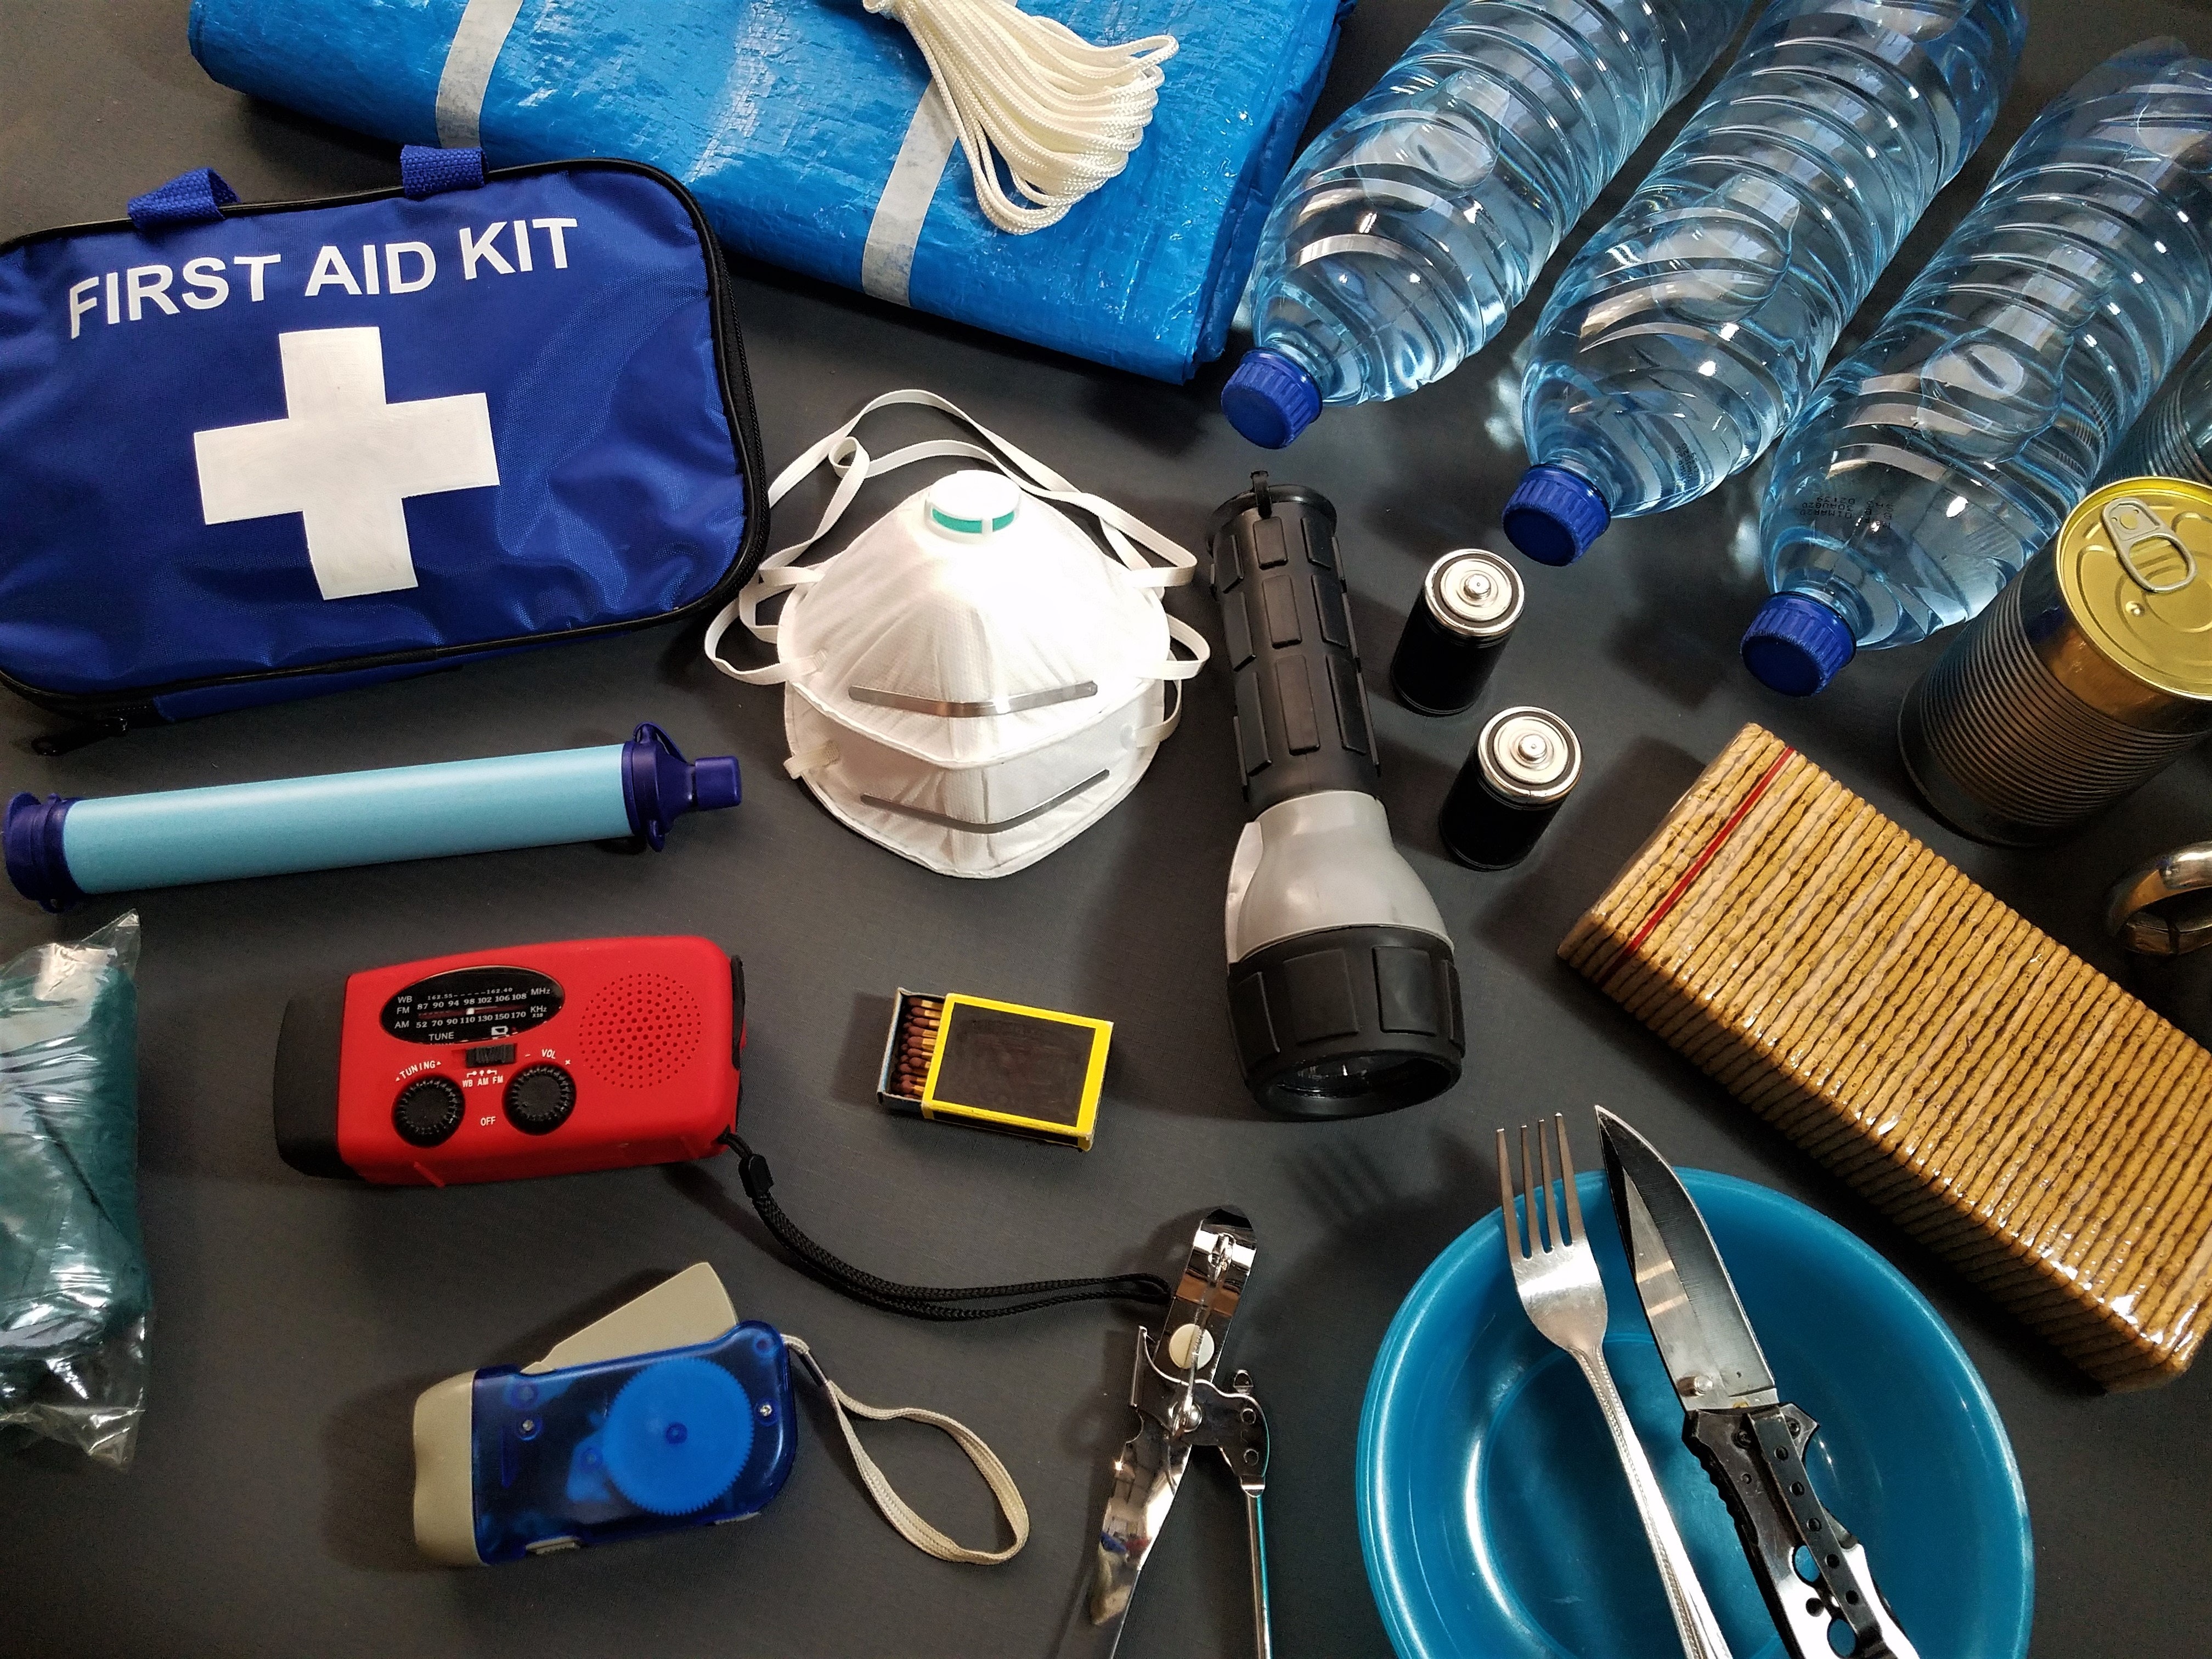 The contents of a typical emergency kit laid out on a table, including flashlight, masks, and first aid kit.